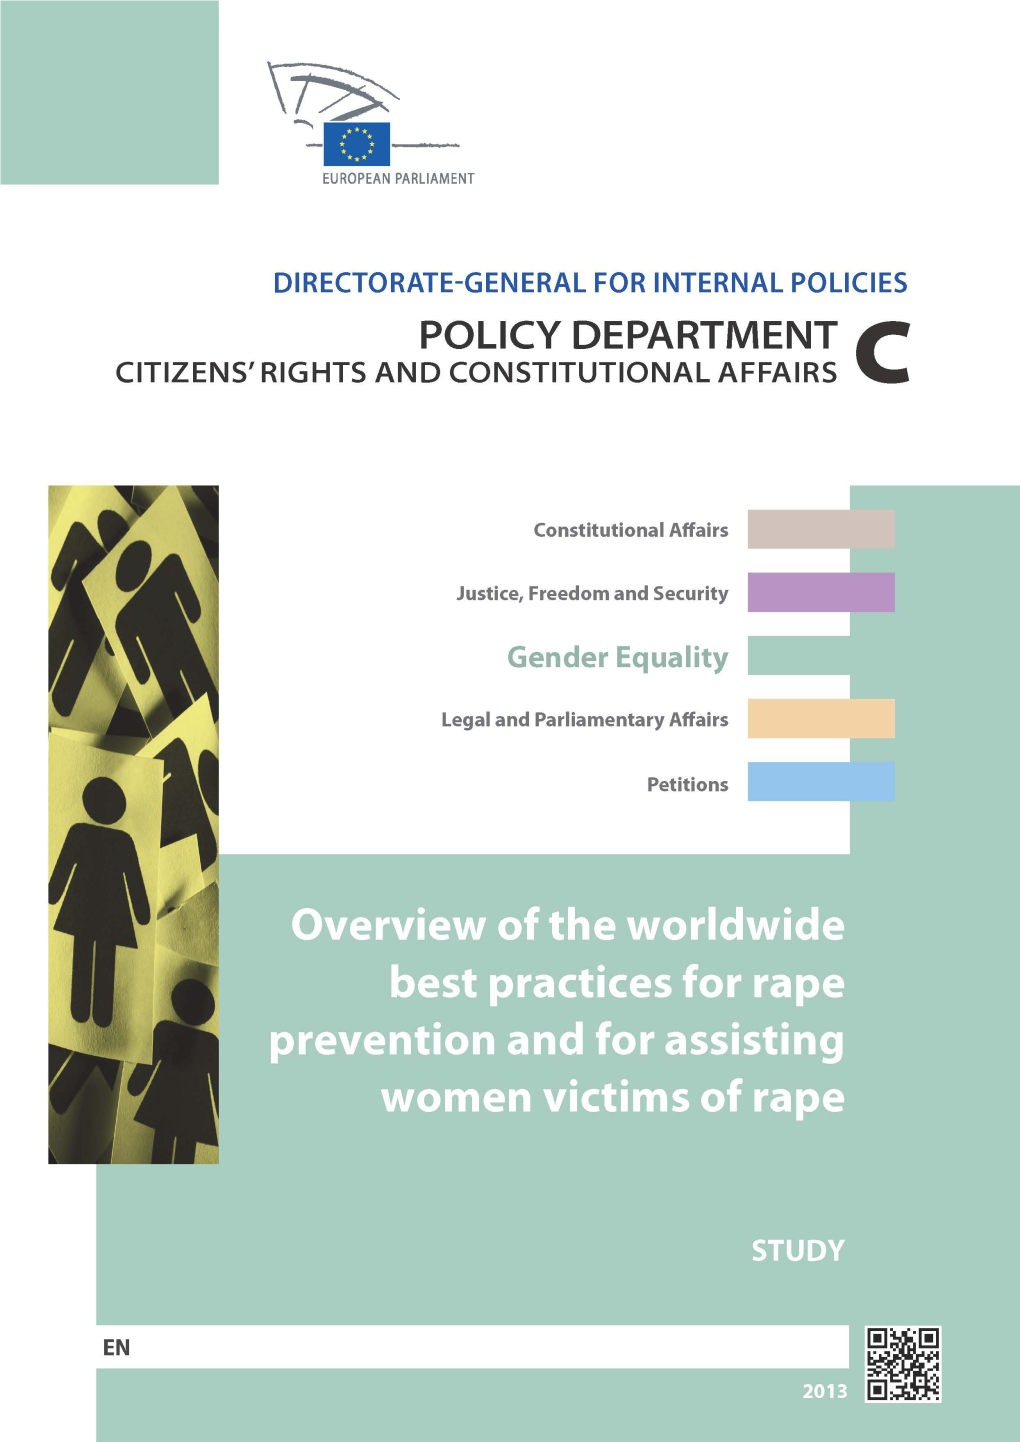 Overview of the Worldwide Best Practices for Rape Prevention and for Assisting Women Victims of Rape